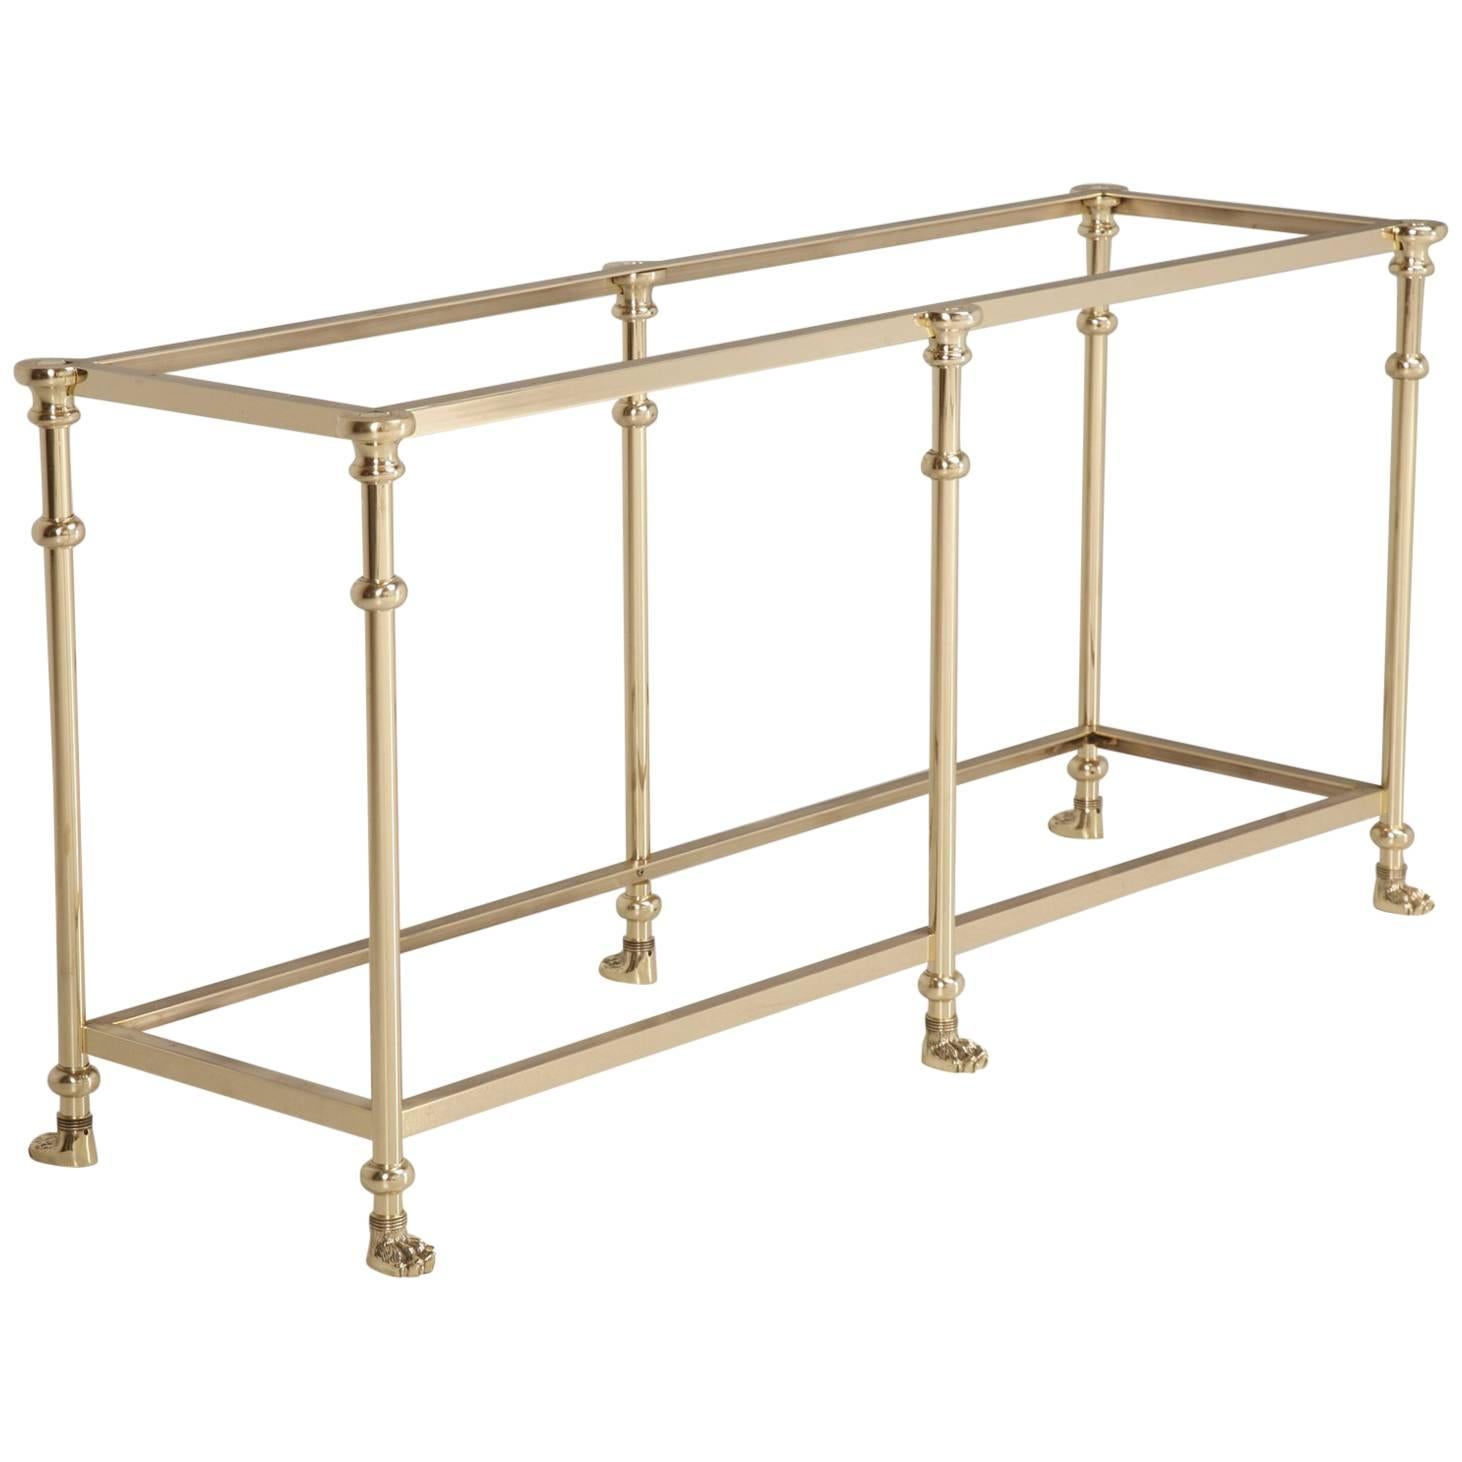 Solid Brass Console Table, or Kitchen Island Paw Feet Per Your Specifications